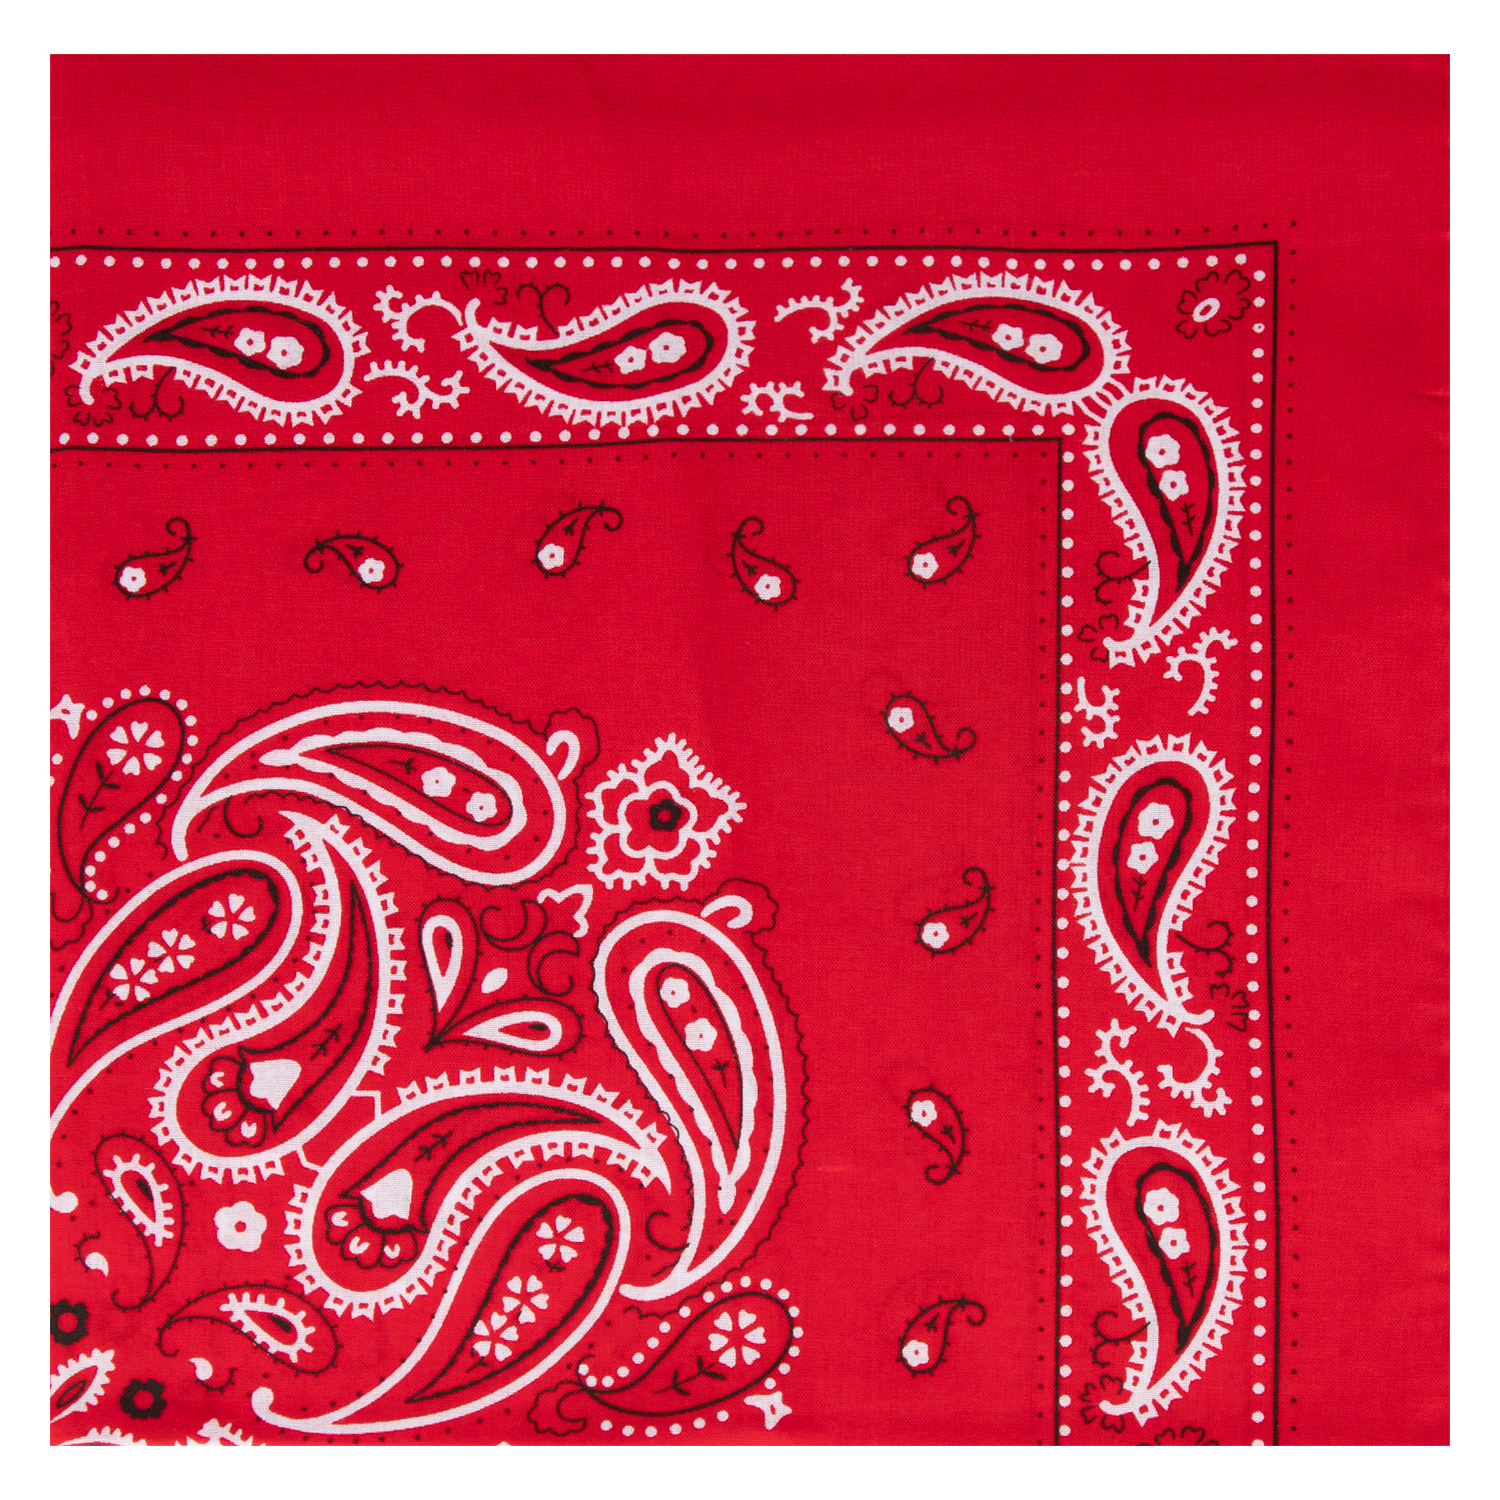 Nickytuch mit Paisleymuster - Farbe rot